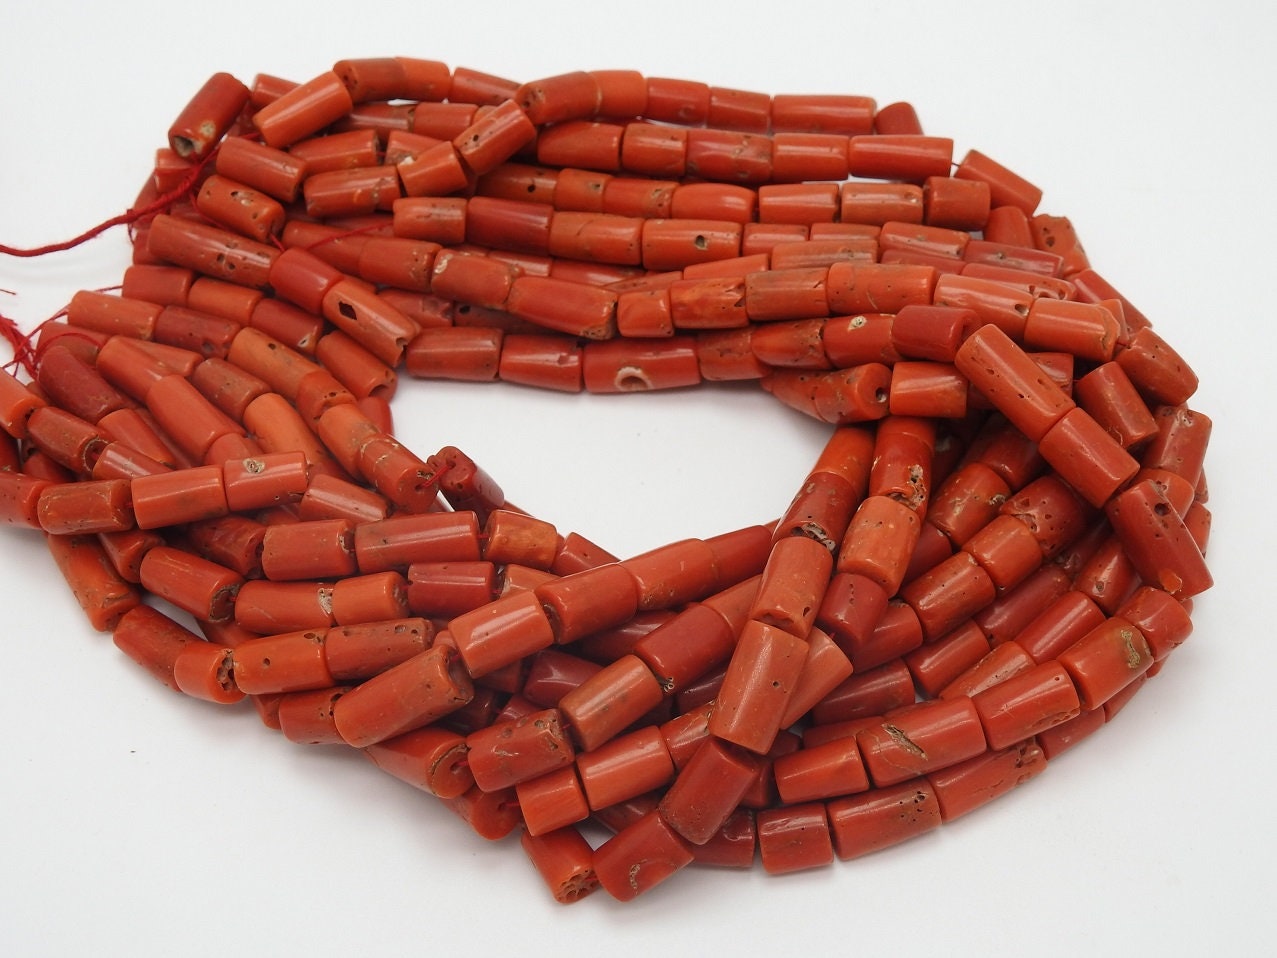 Natural Red Coral Smooth Tube,Drum,Cylinder Shape Beads,Handmade,Loose Stone,For Making Jewelry,Wholesaler,Supplies 100%Natural (bk)CR2 | Save 33% - Rajasthan Living 15